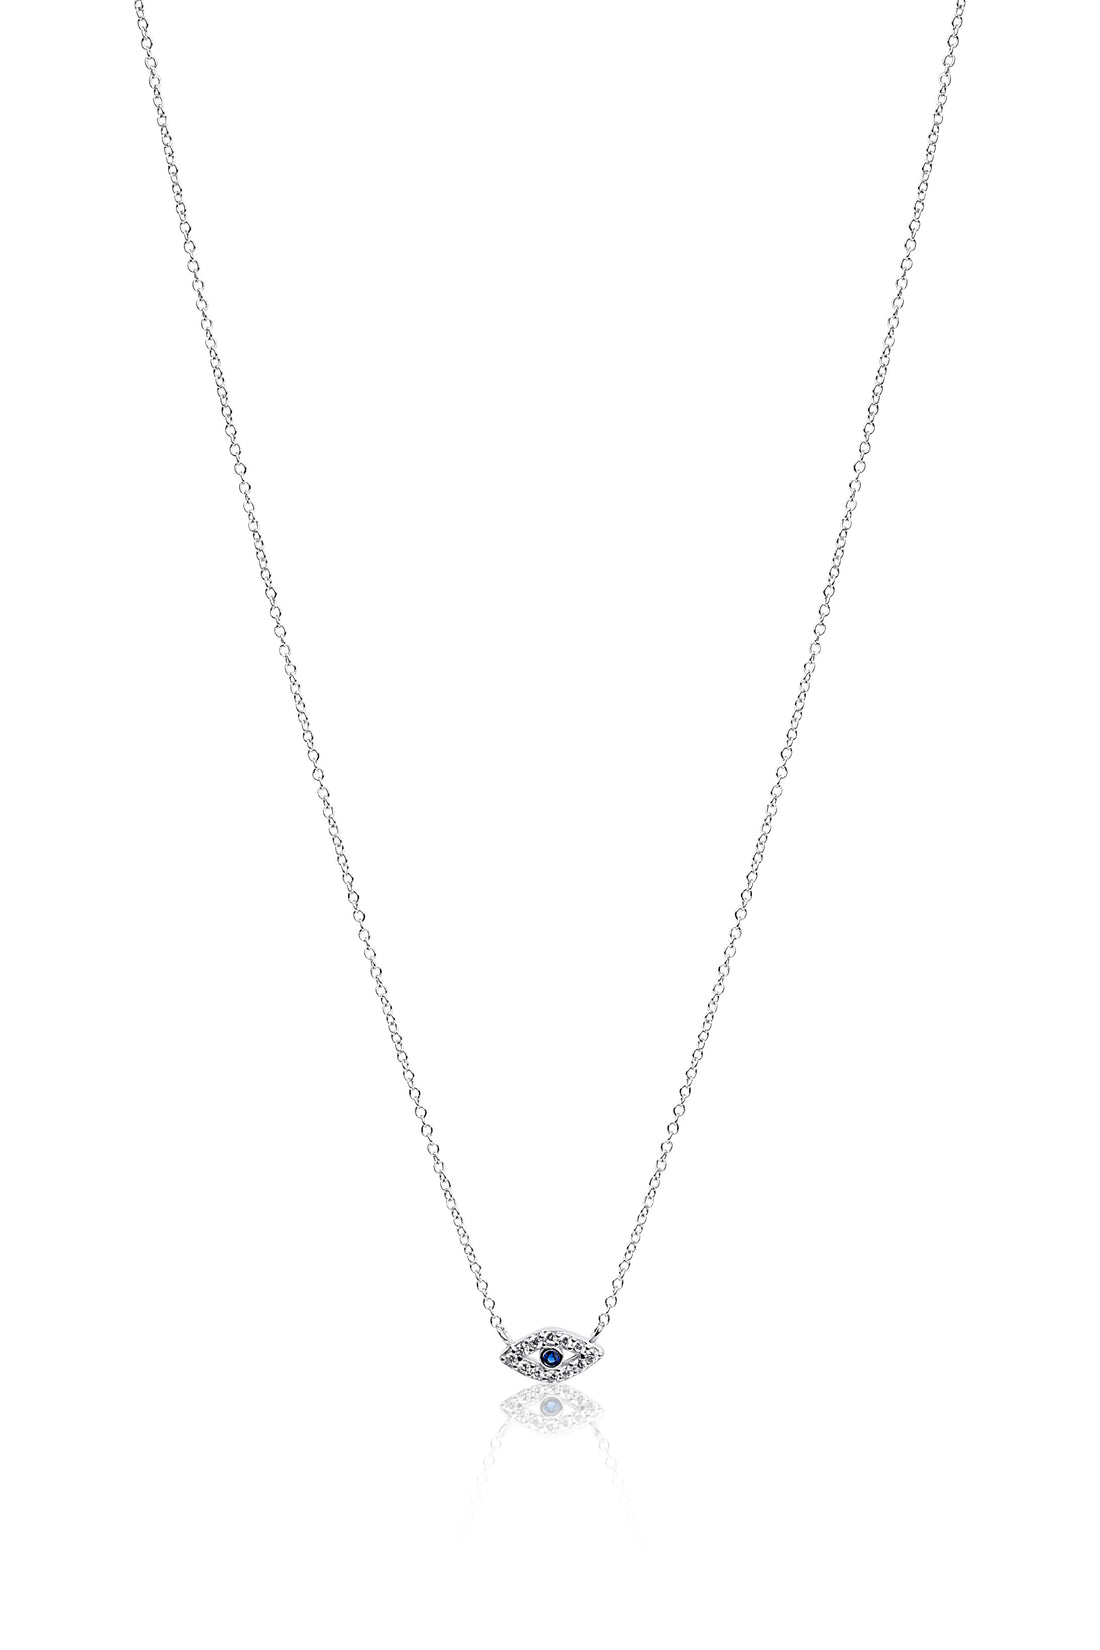 The Evil Eye Necklace - Silver